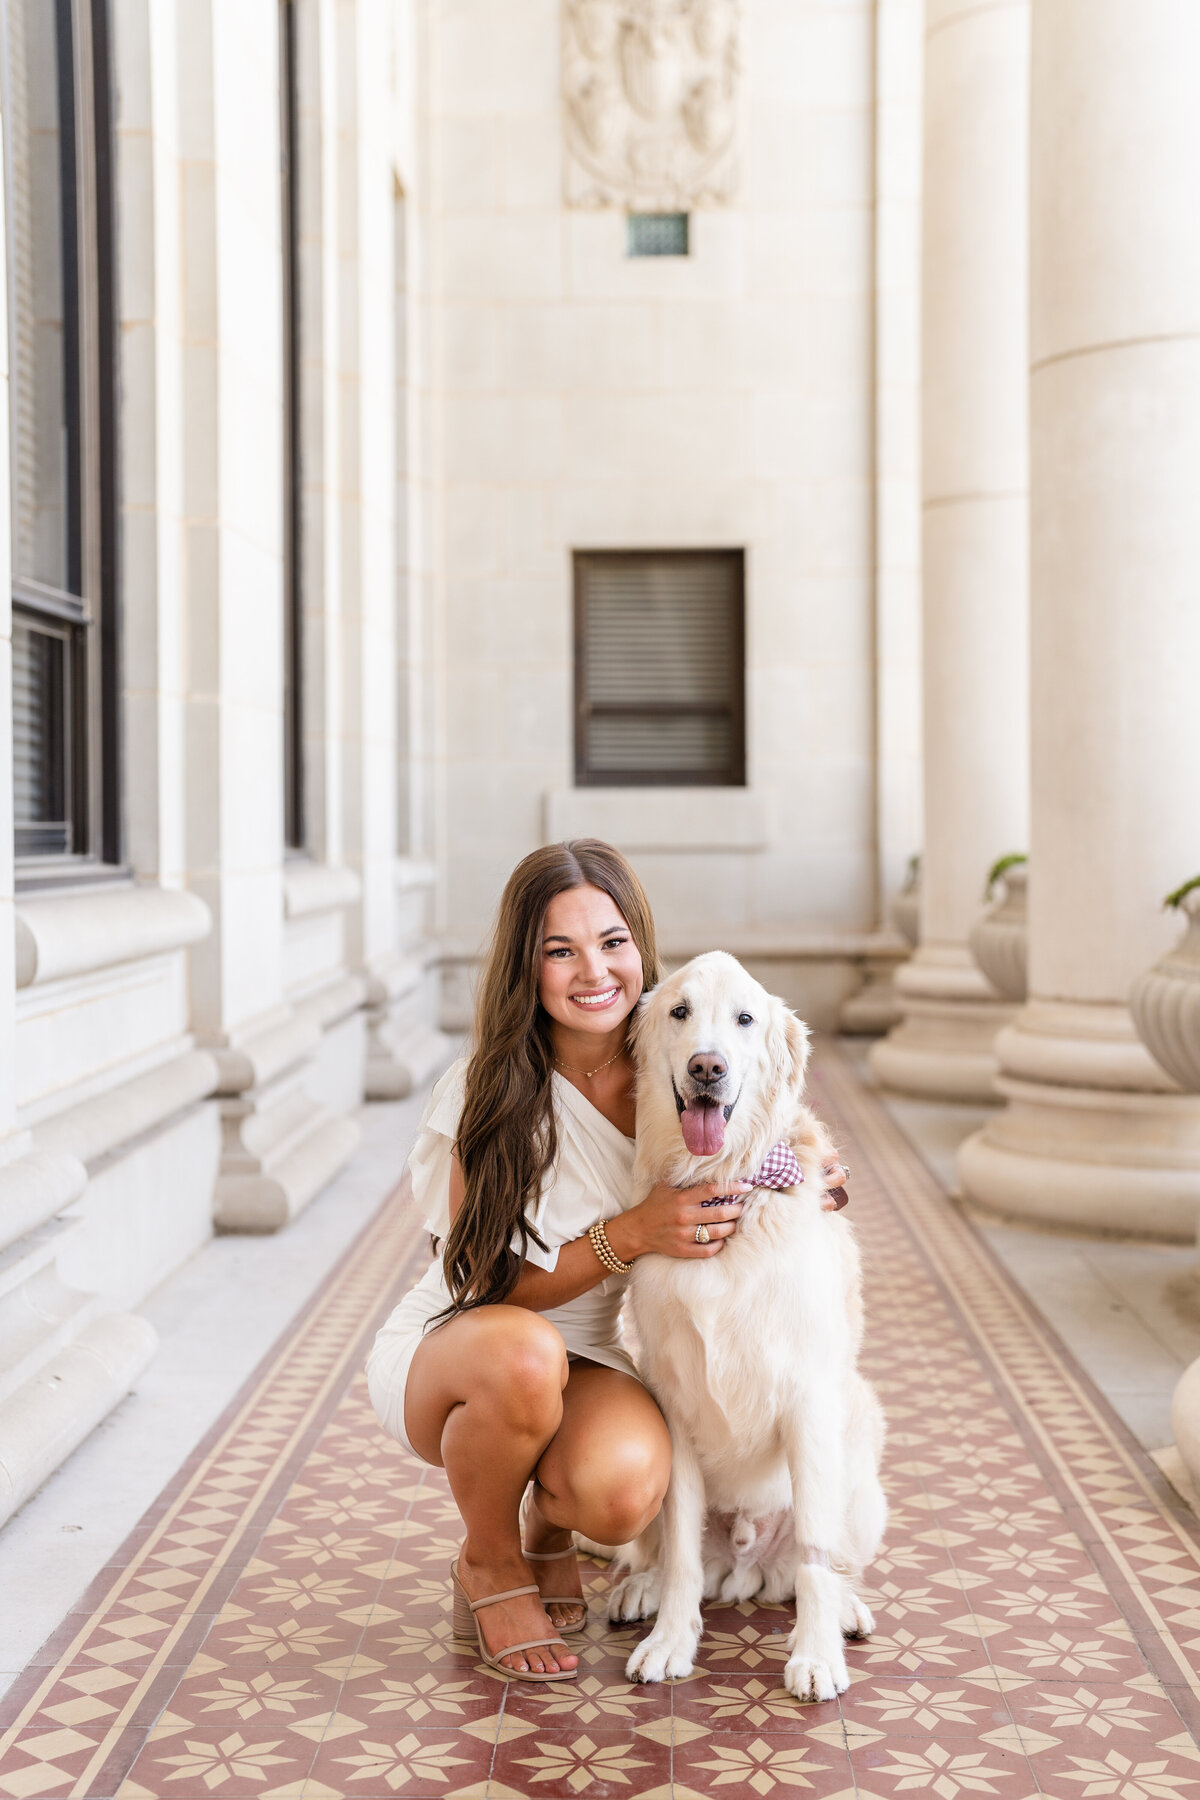 Texas A&M senior girl hugging dog and smiling while wearing white dress in the columns of the Administration Building